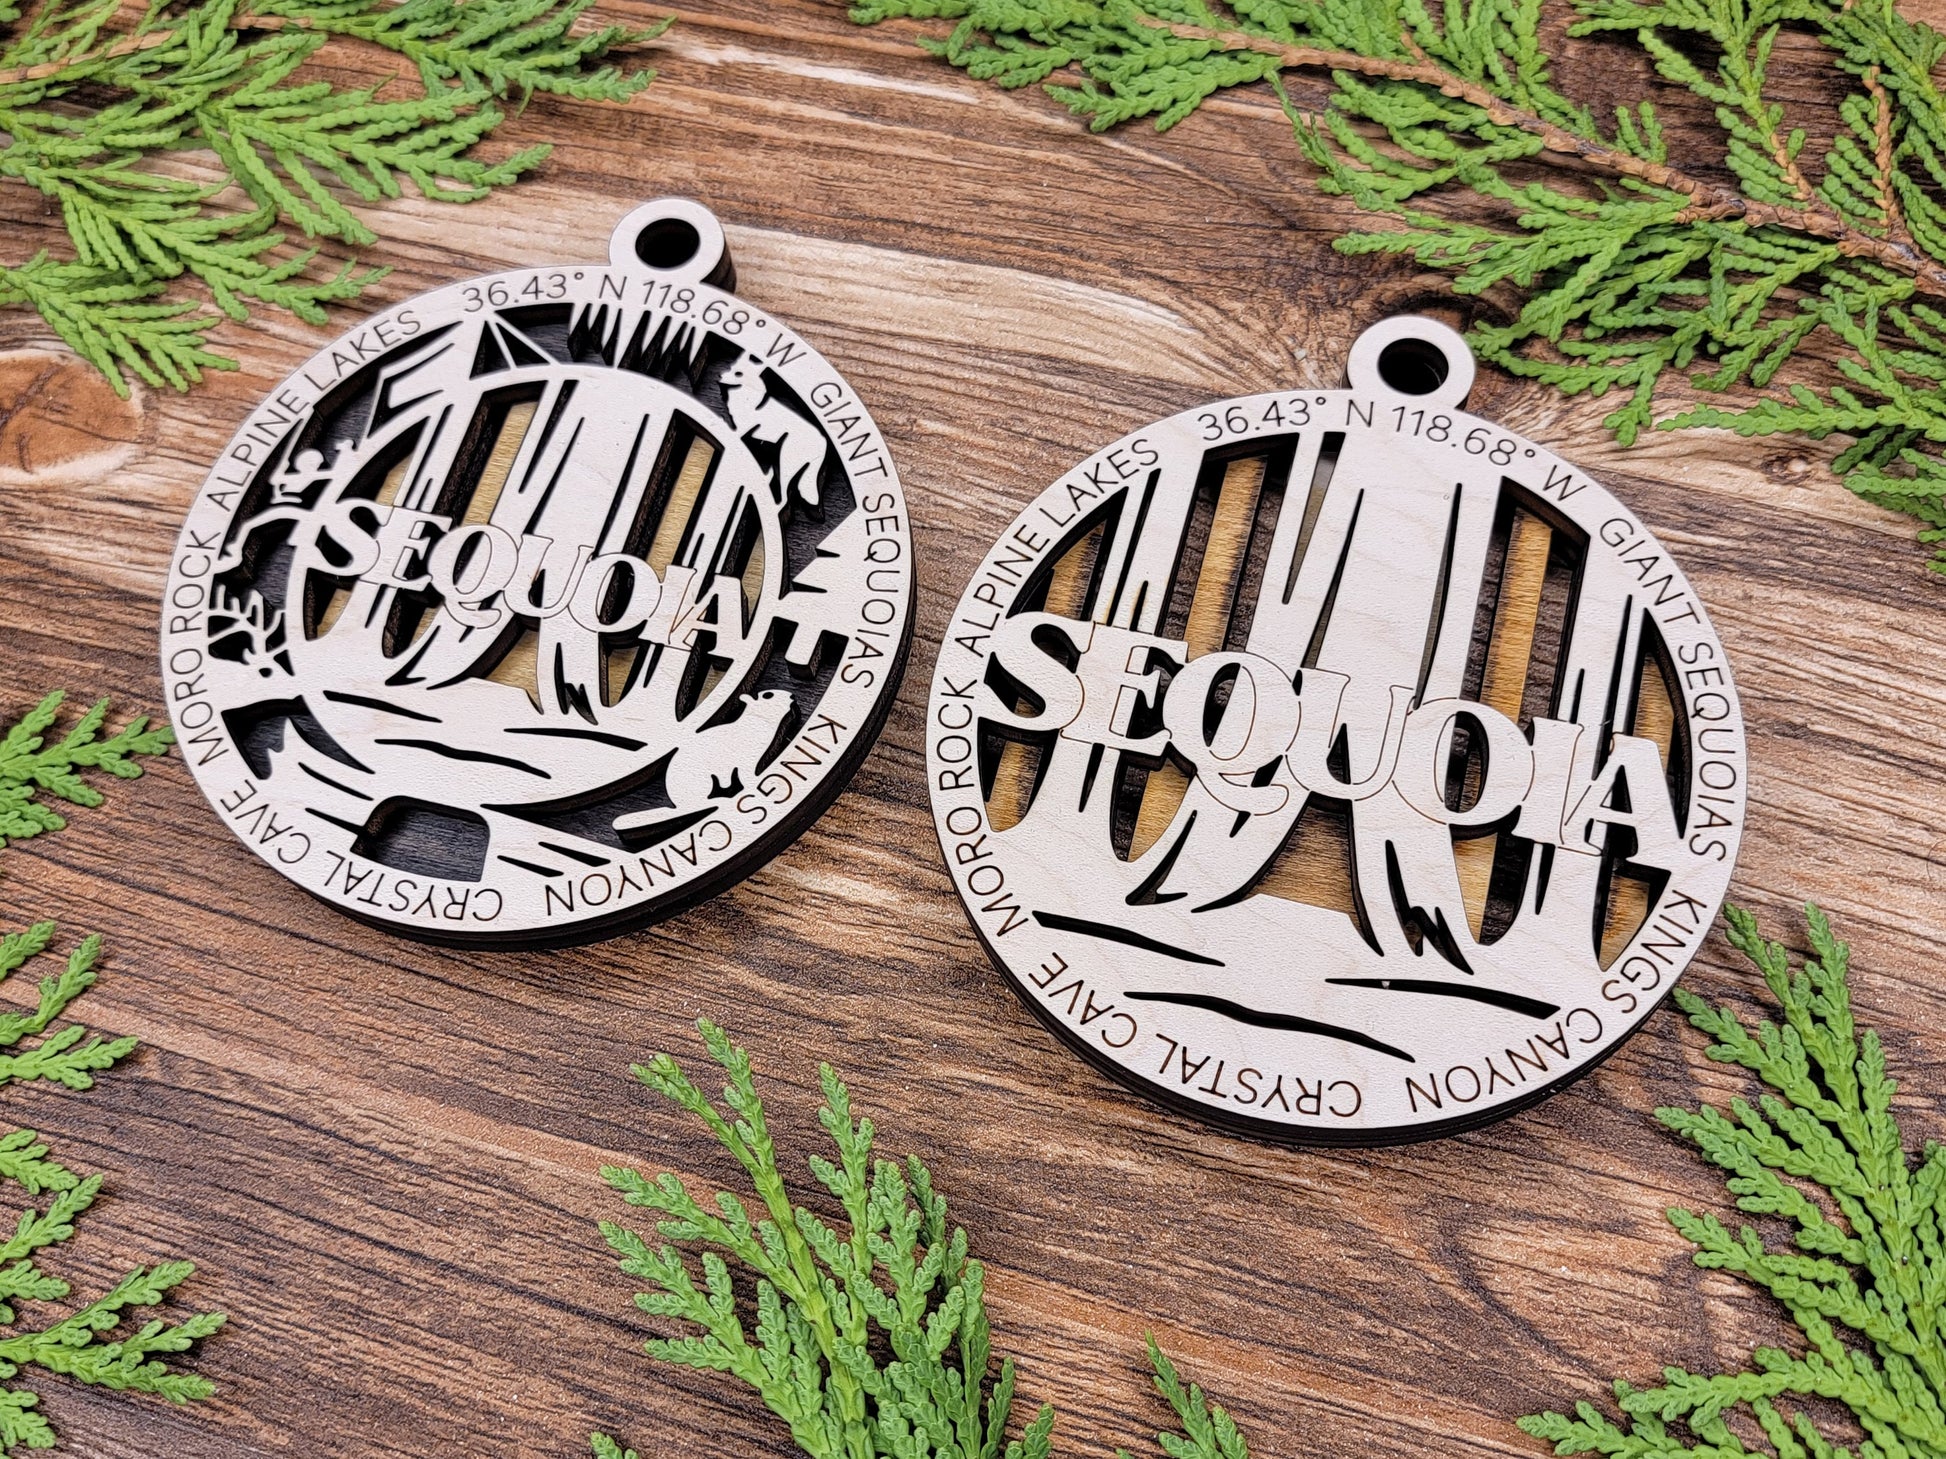 Sequoia Park Ornament - Includes 2 Ornaments - Laser Design SVG, PDF, AI File Download - Tested On Glowforge and LightBurn